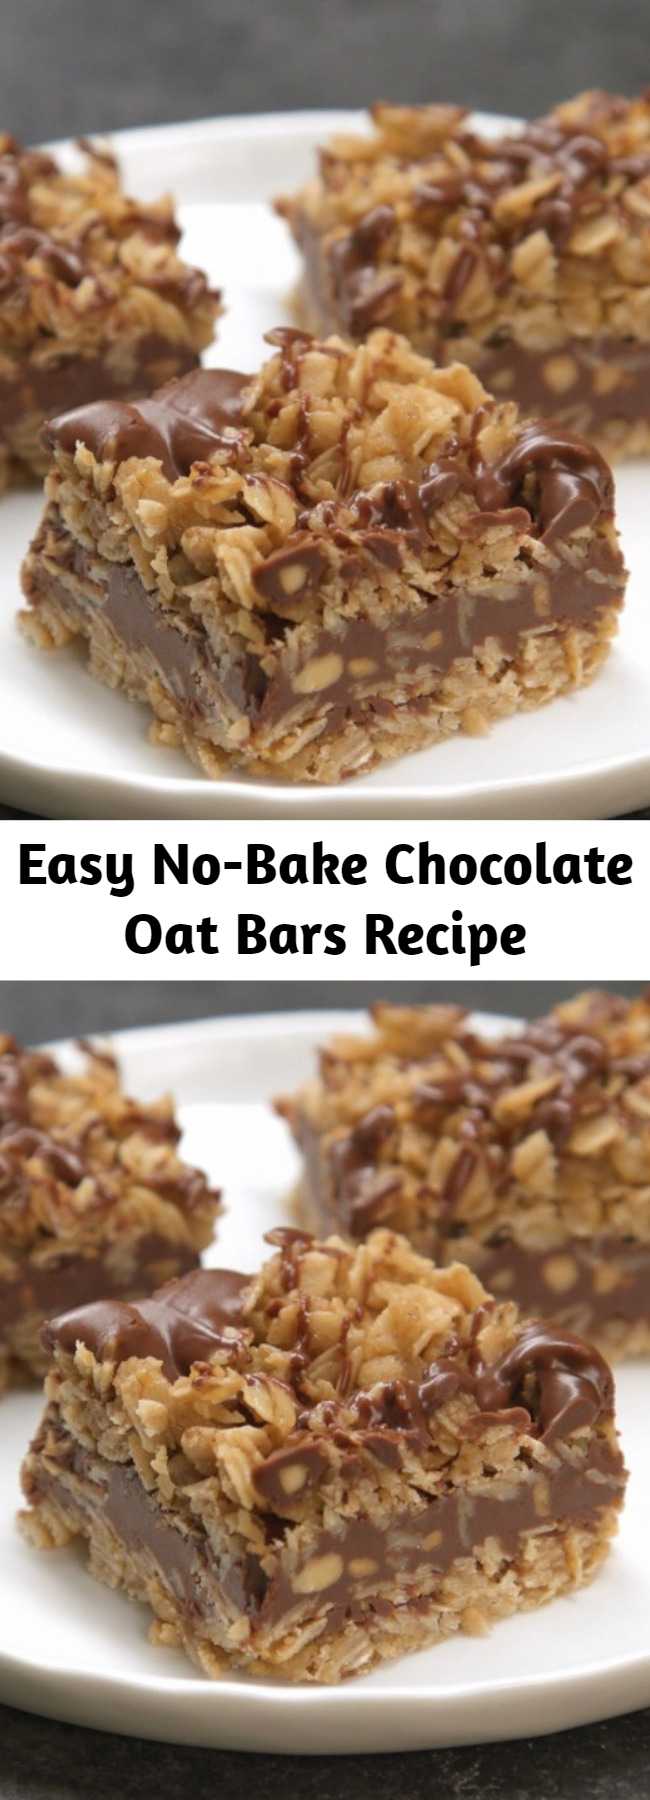 Easy No-Bake Chocolate Oat Bars Recipe - Yum! Delicious, easy, and no need to turn on the oven. Plus, if you want to make a whole bunch of bars ahead of time, you can totally freeze them, too! Just make sure you bring them back to room temperature before enjoying.